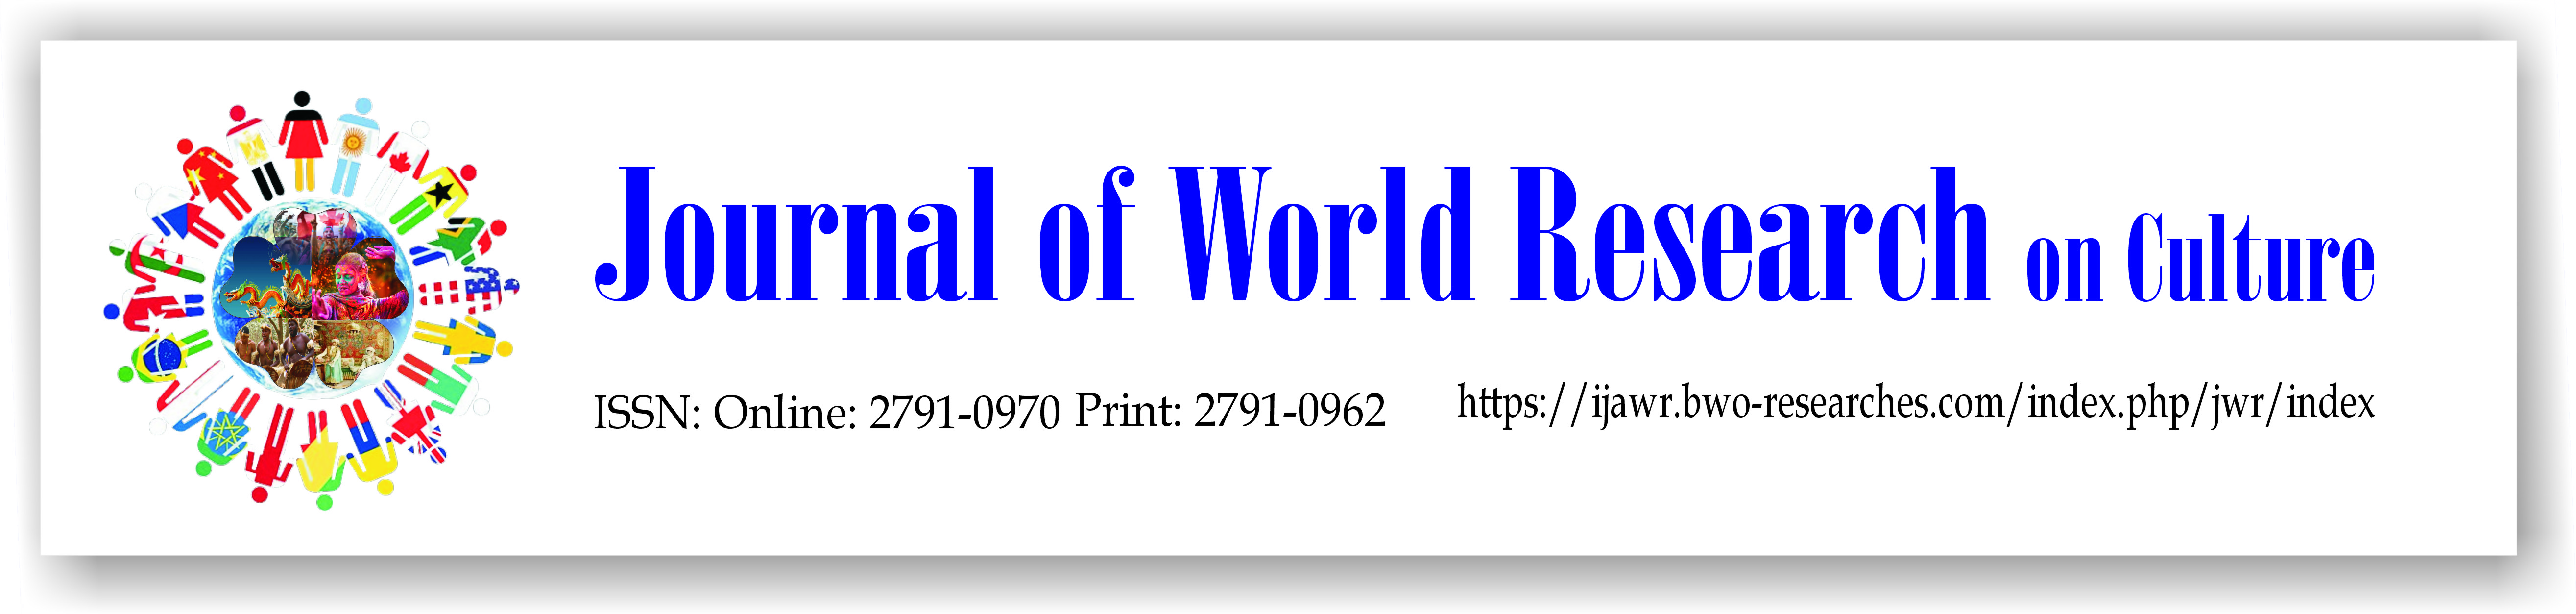 The Journal of World Research on Culture